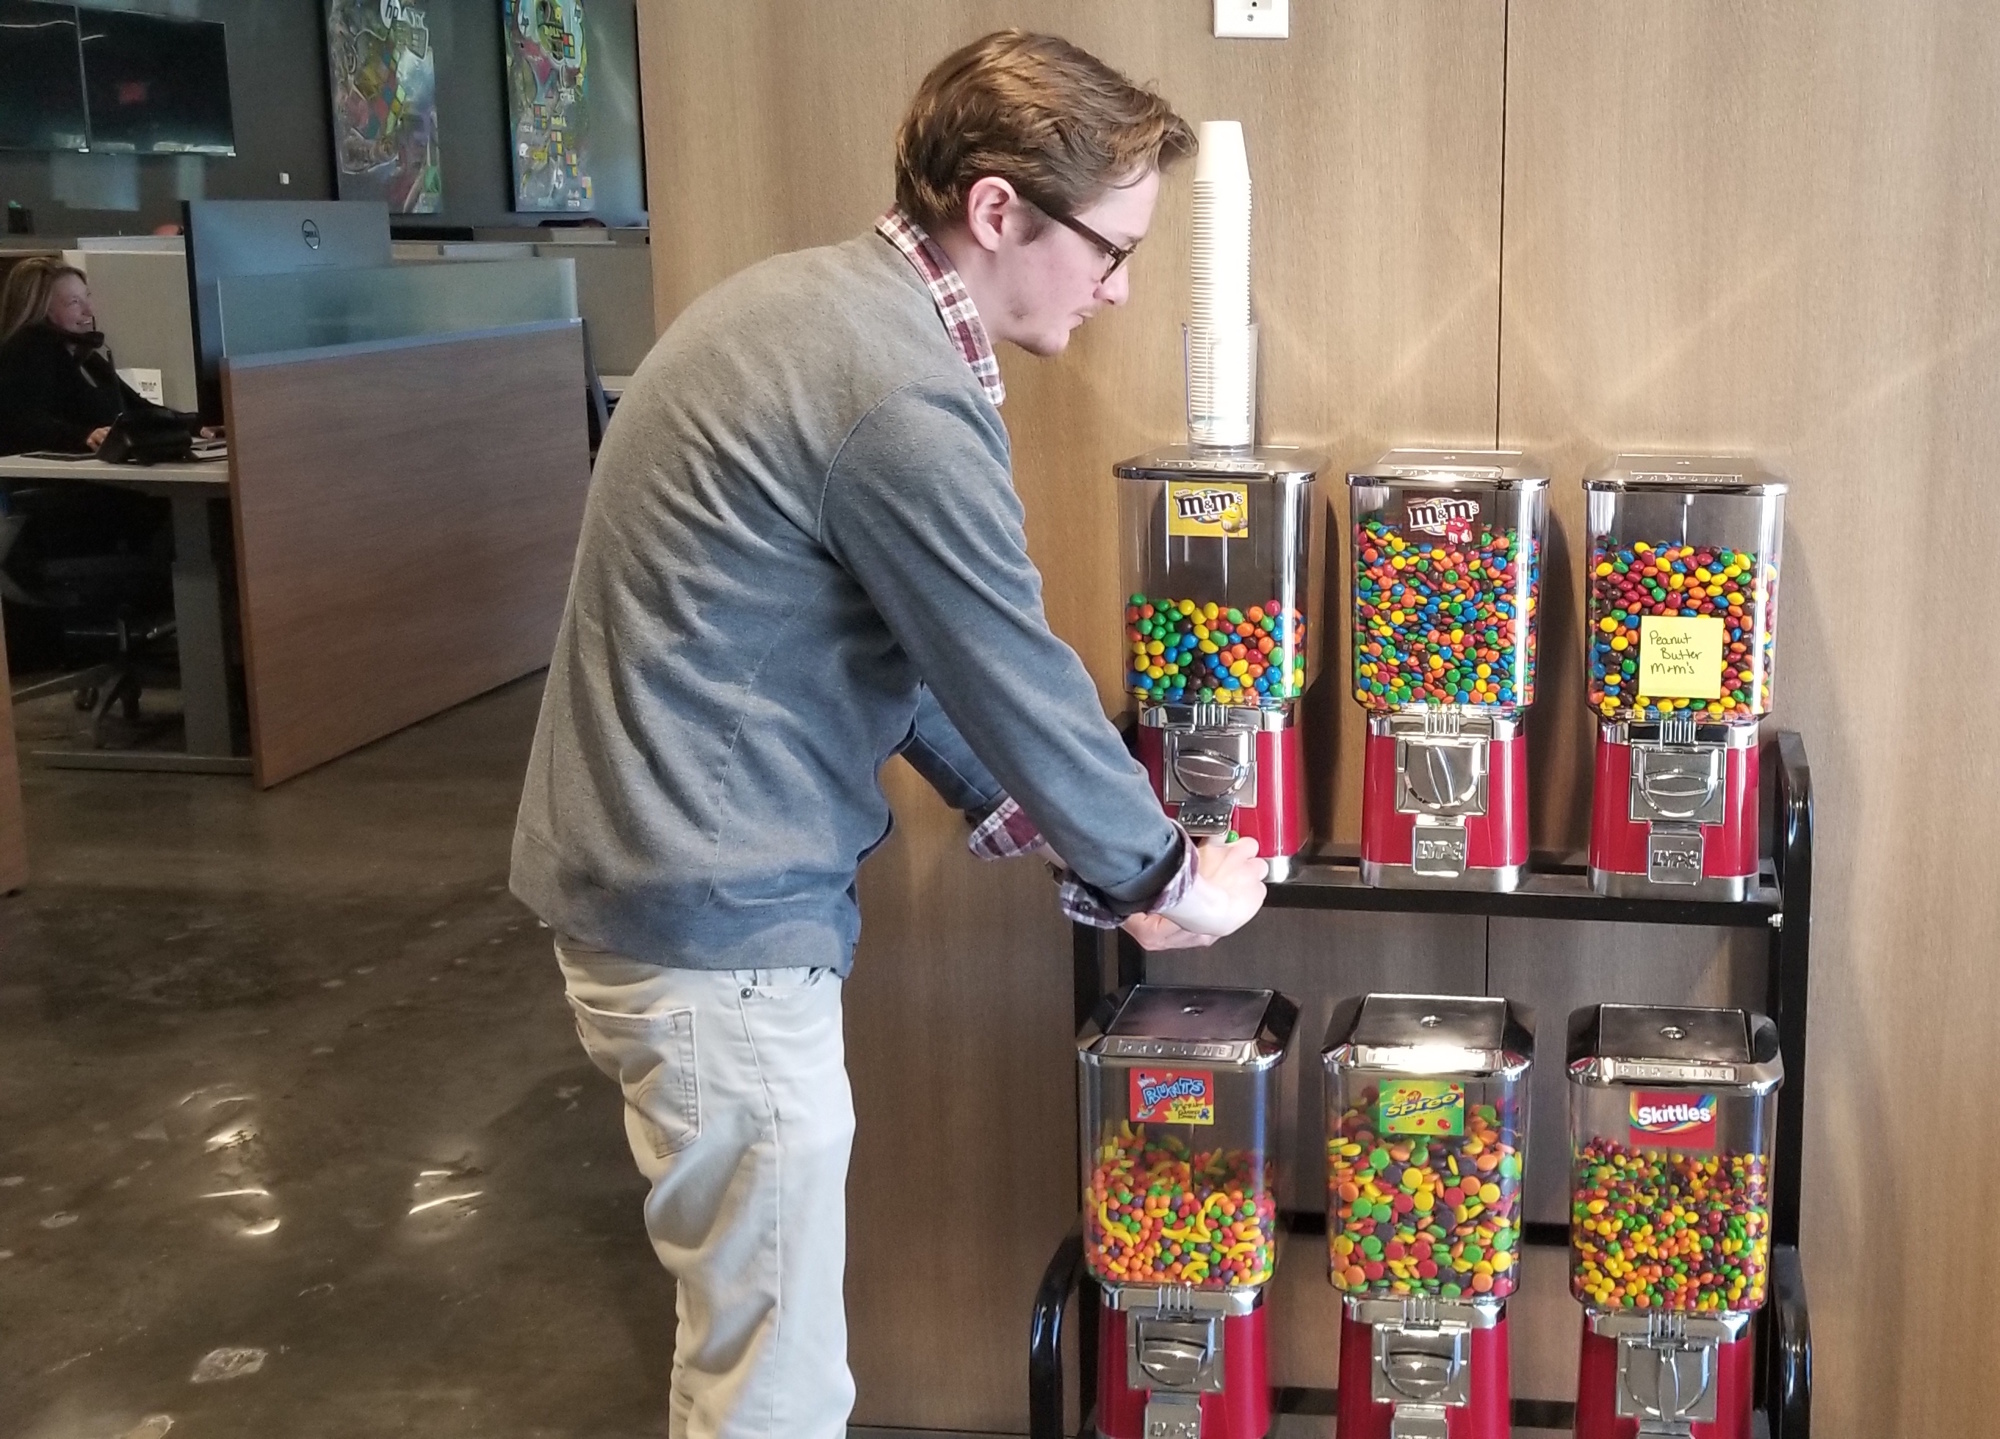 Courtesy. The lobby at Atlas Professional Services in Tampa has a candy machine where employees can grab a handful of M&Ms or Skittles.